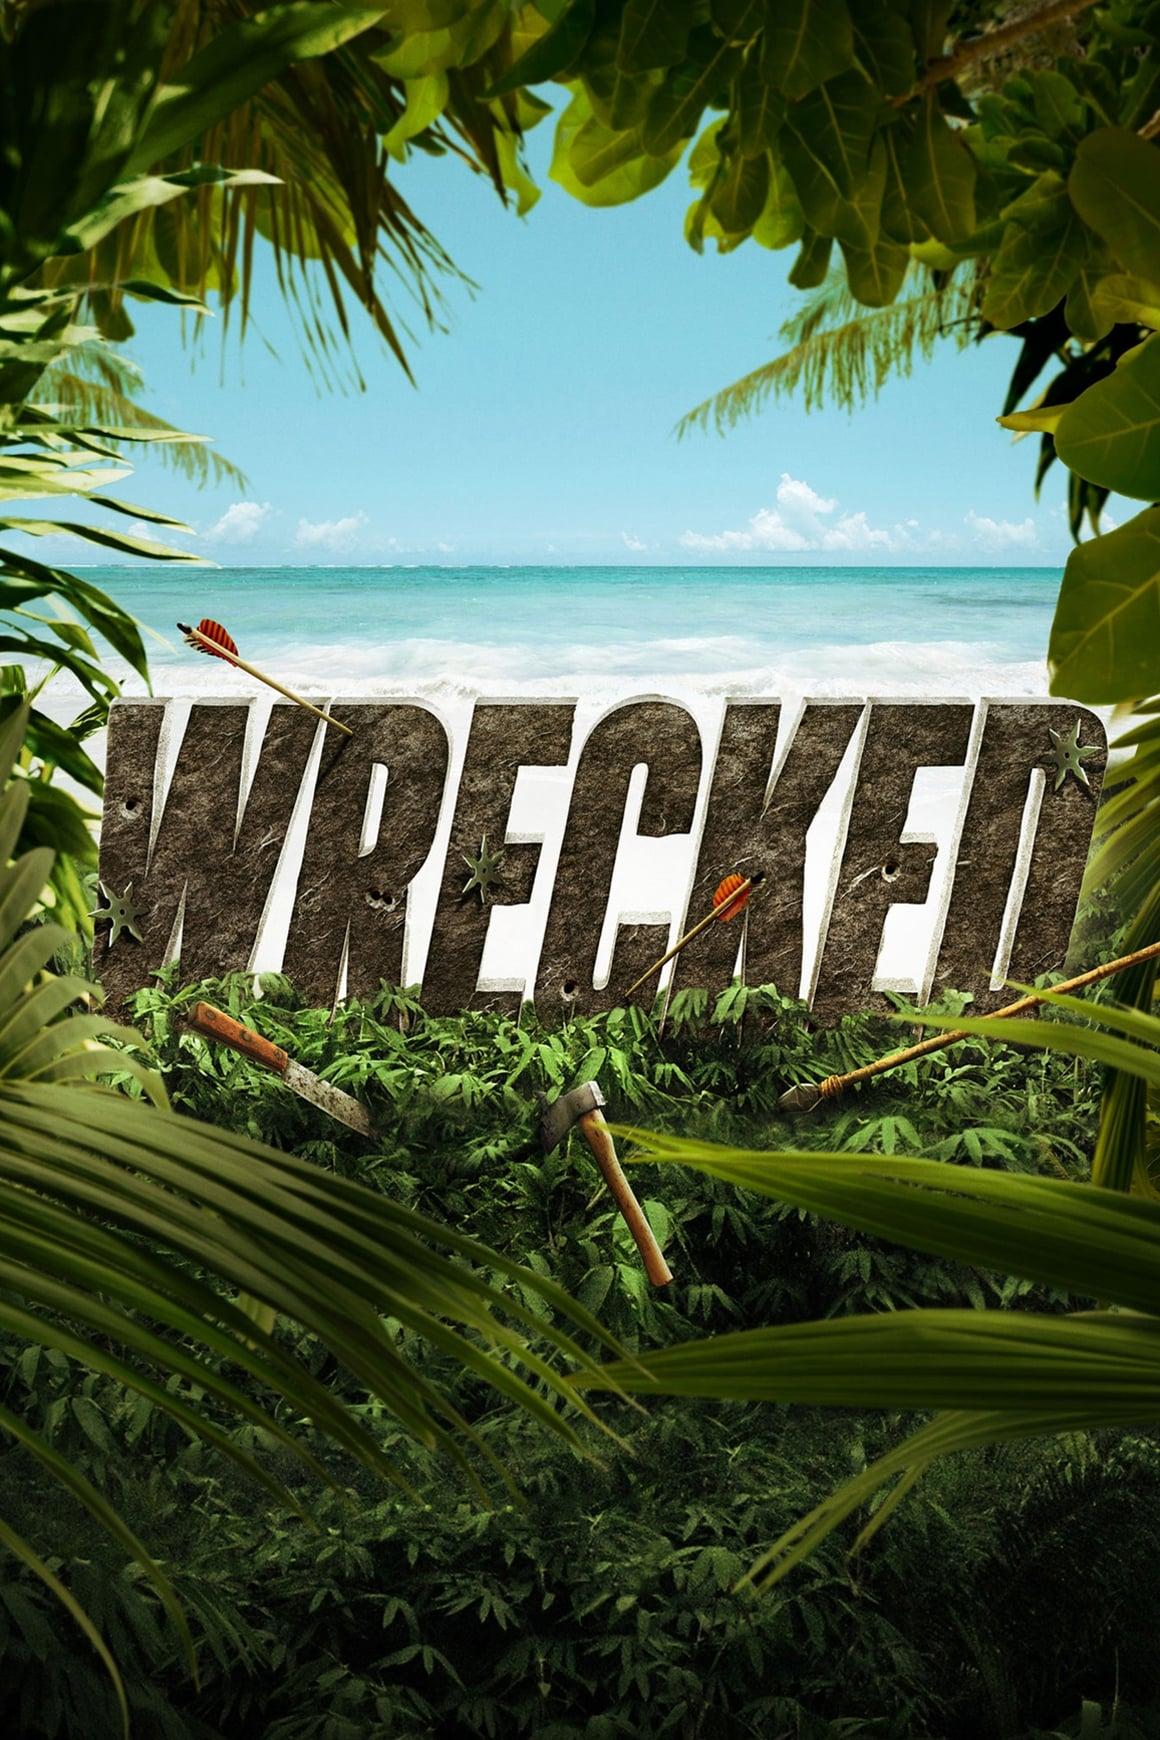 Wrecked poster